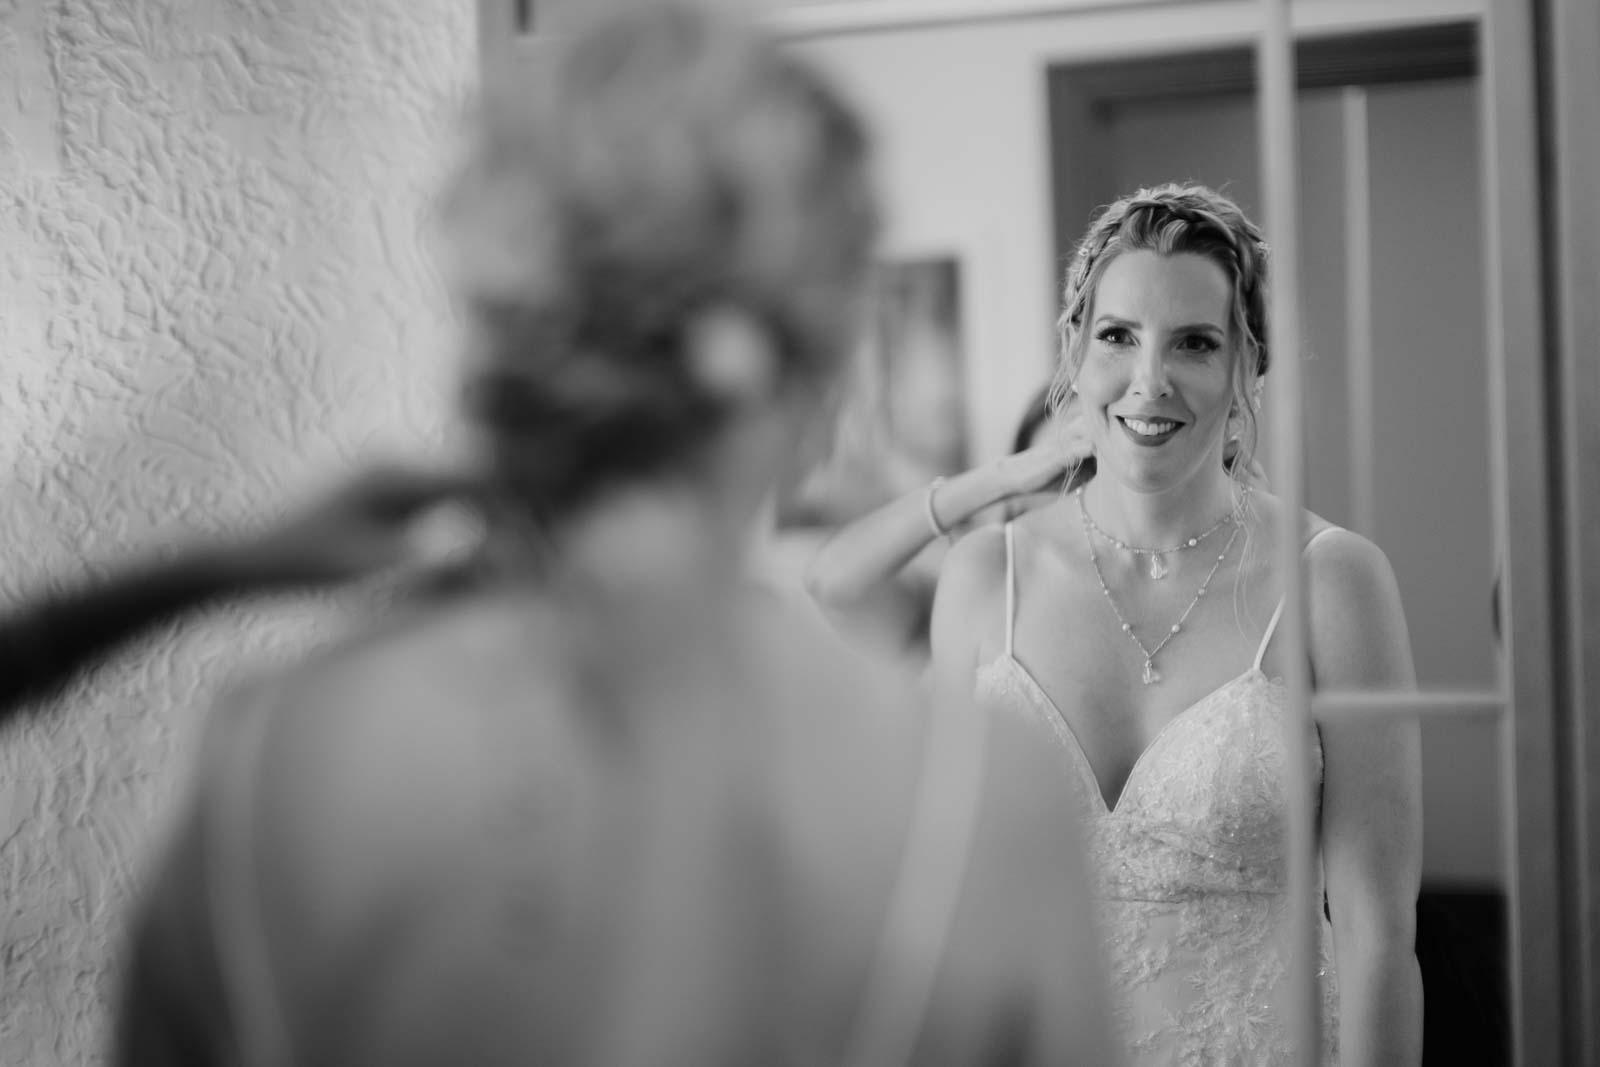 A close-up shot of the bride ashy changes into a second dress on her wedding day looking in the mirror very happy